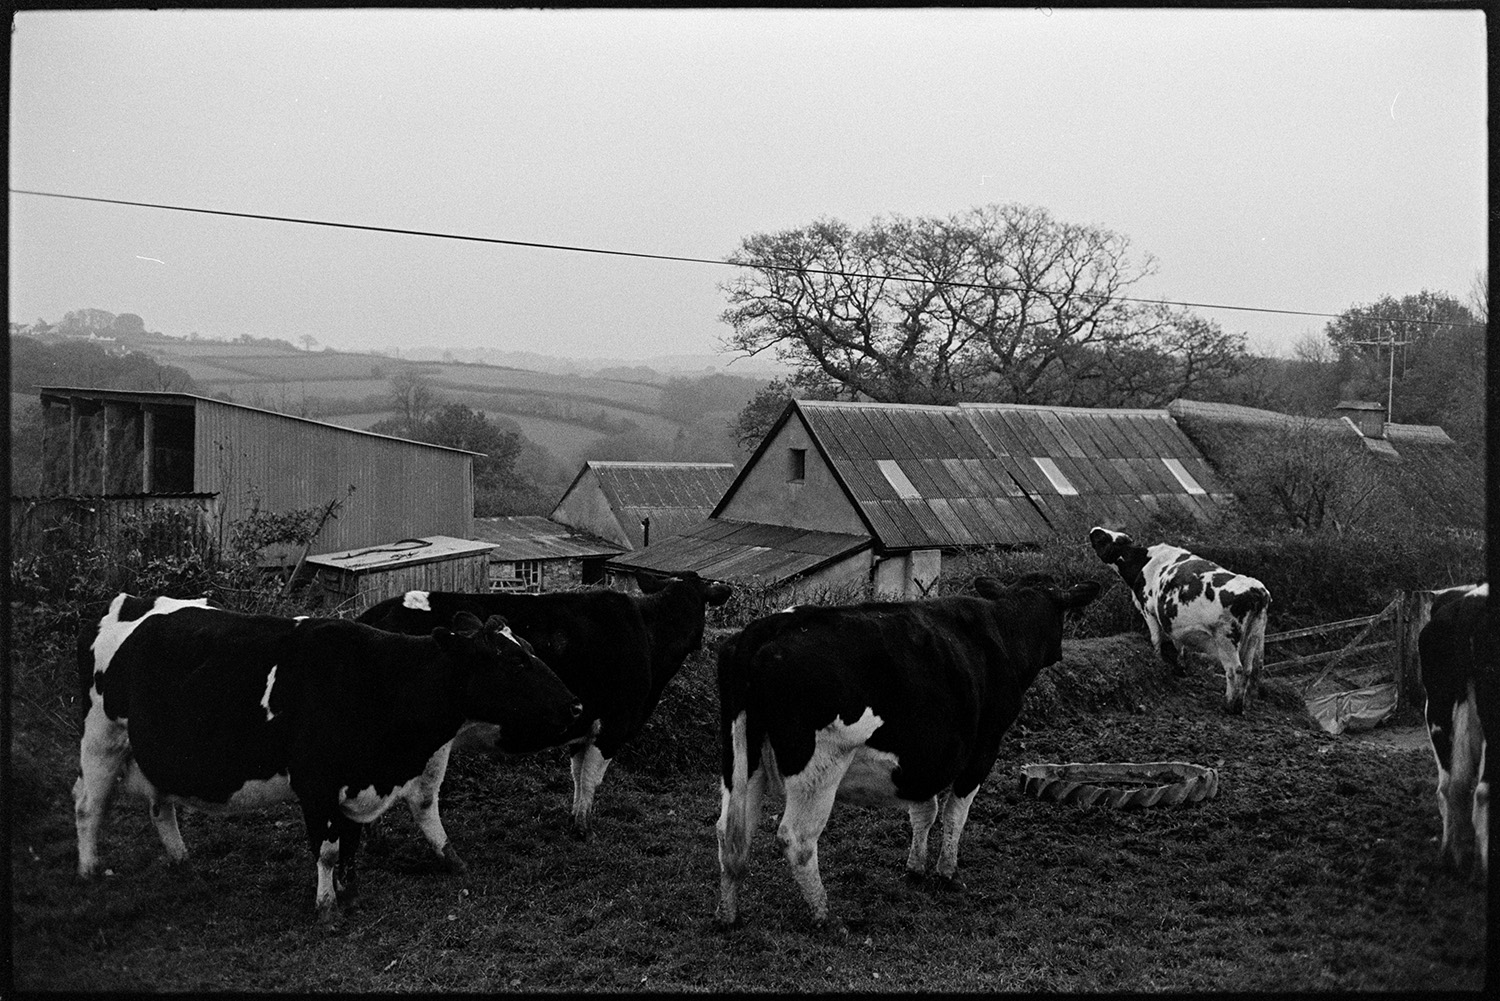 Cows coming in to farm to be milked.
[Cows standing in a field in front of group of farm buildings which include a building with a thatched roof and corrugated iron barns, at Woolridge, Dolton. The background shows surrounding fields.]